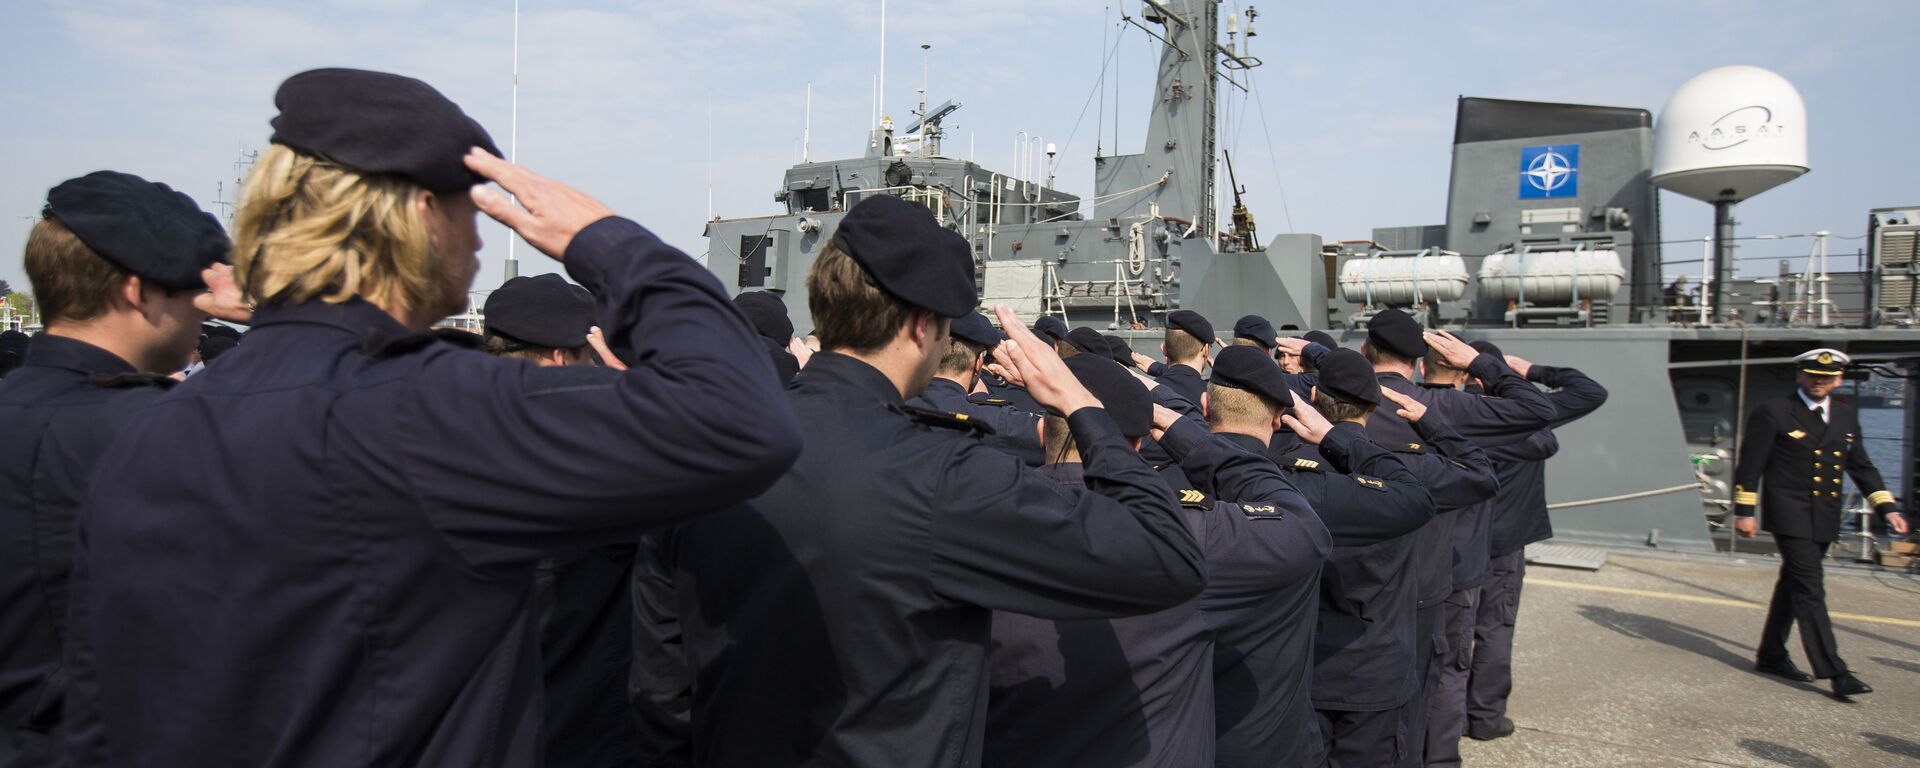 Crew members of Norwegian minesweeper Otra salute after a briefing of NATO Allied Maritime Command Deputy Chief of Staff for Operations, Commodore Arian Minderhoud, right, of the Royal Netherlands Navy before setting sail together in a convoy of five ships of Norway, Belgium, the Netherlands and Estonia from Kiel, Germany, Tuesday, April 22, 2014 - Sputnik International, 1920, 21.04.2022